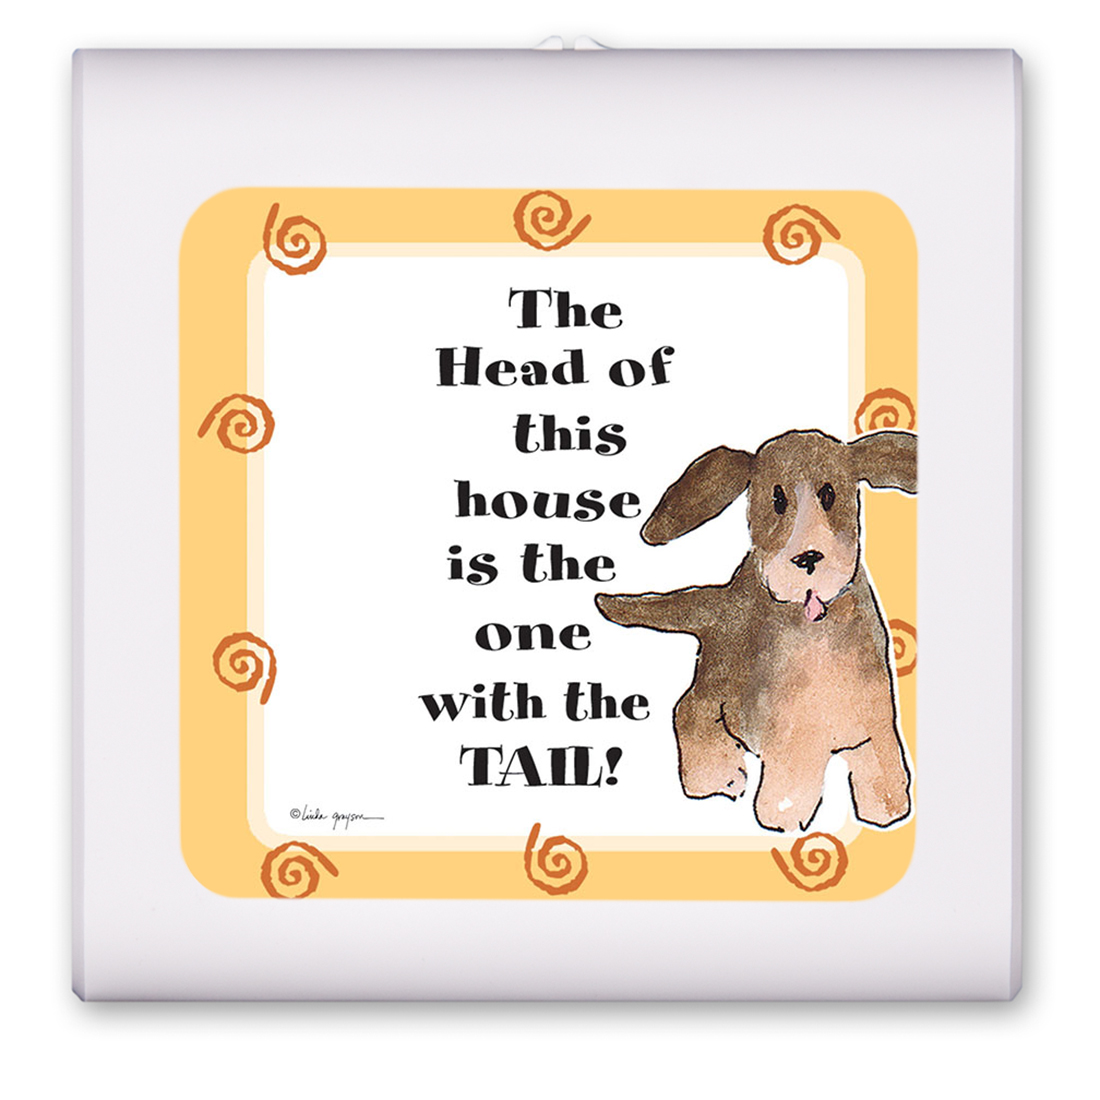 The Head of the House - #378